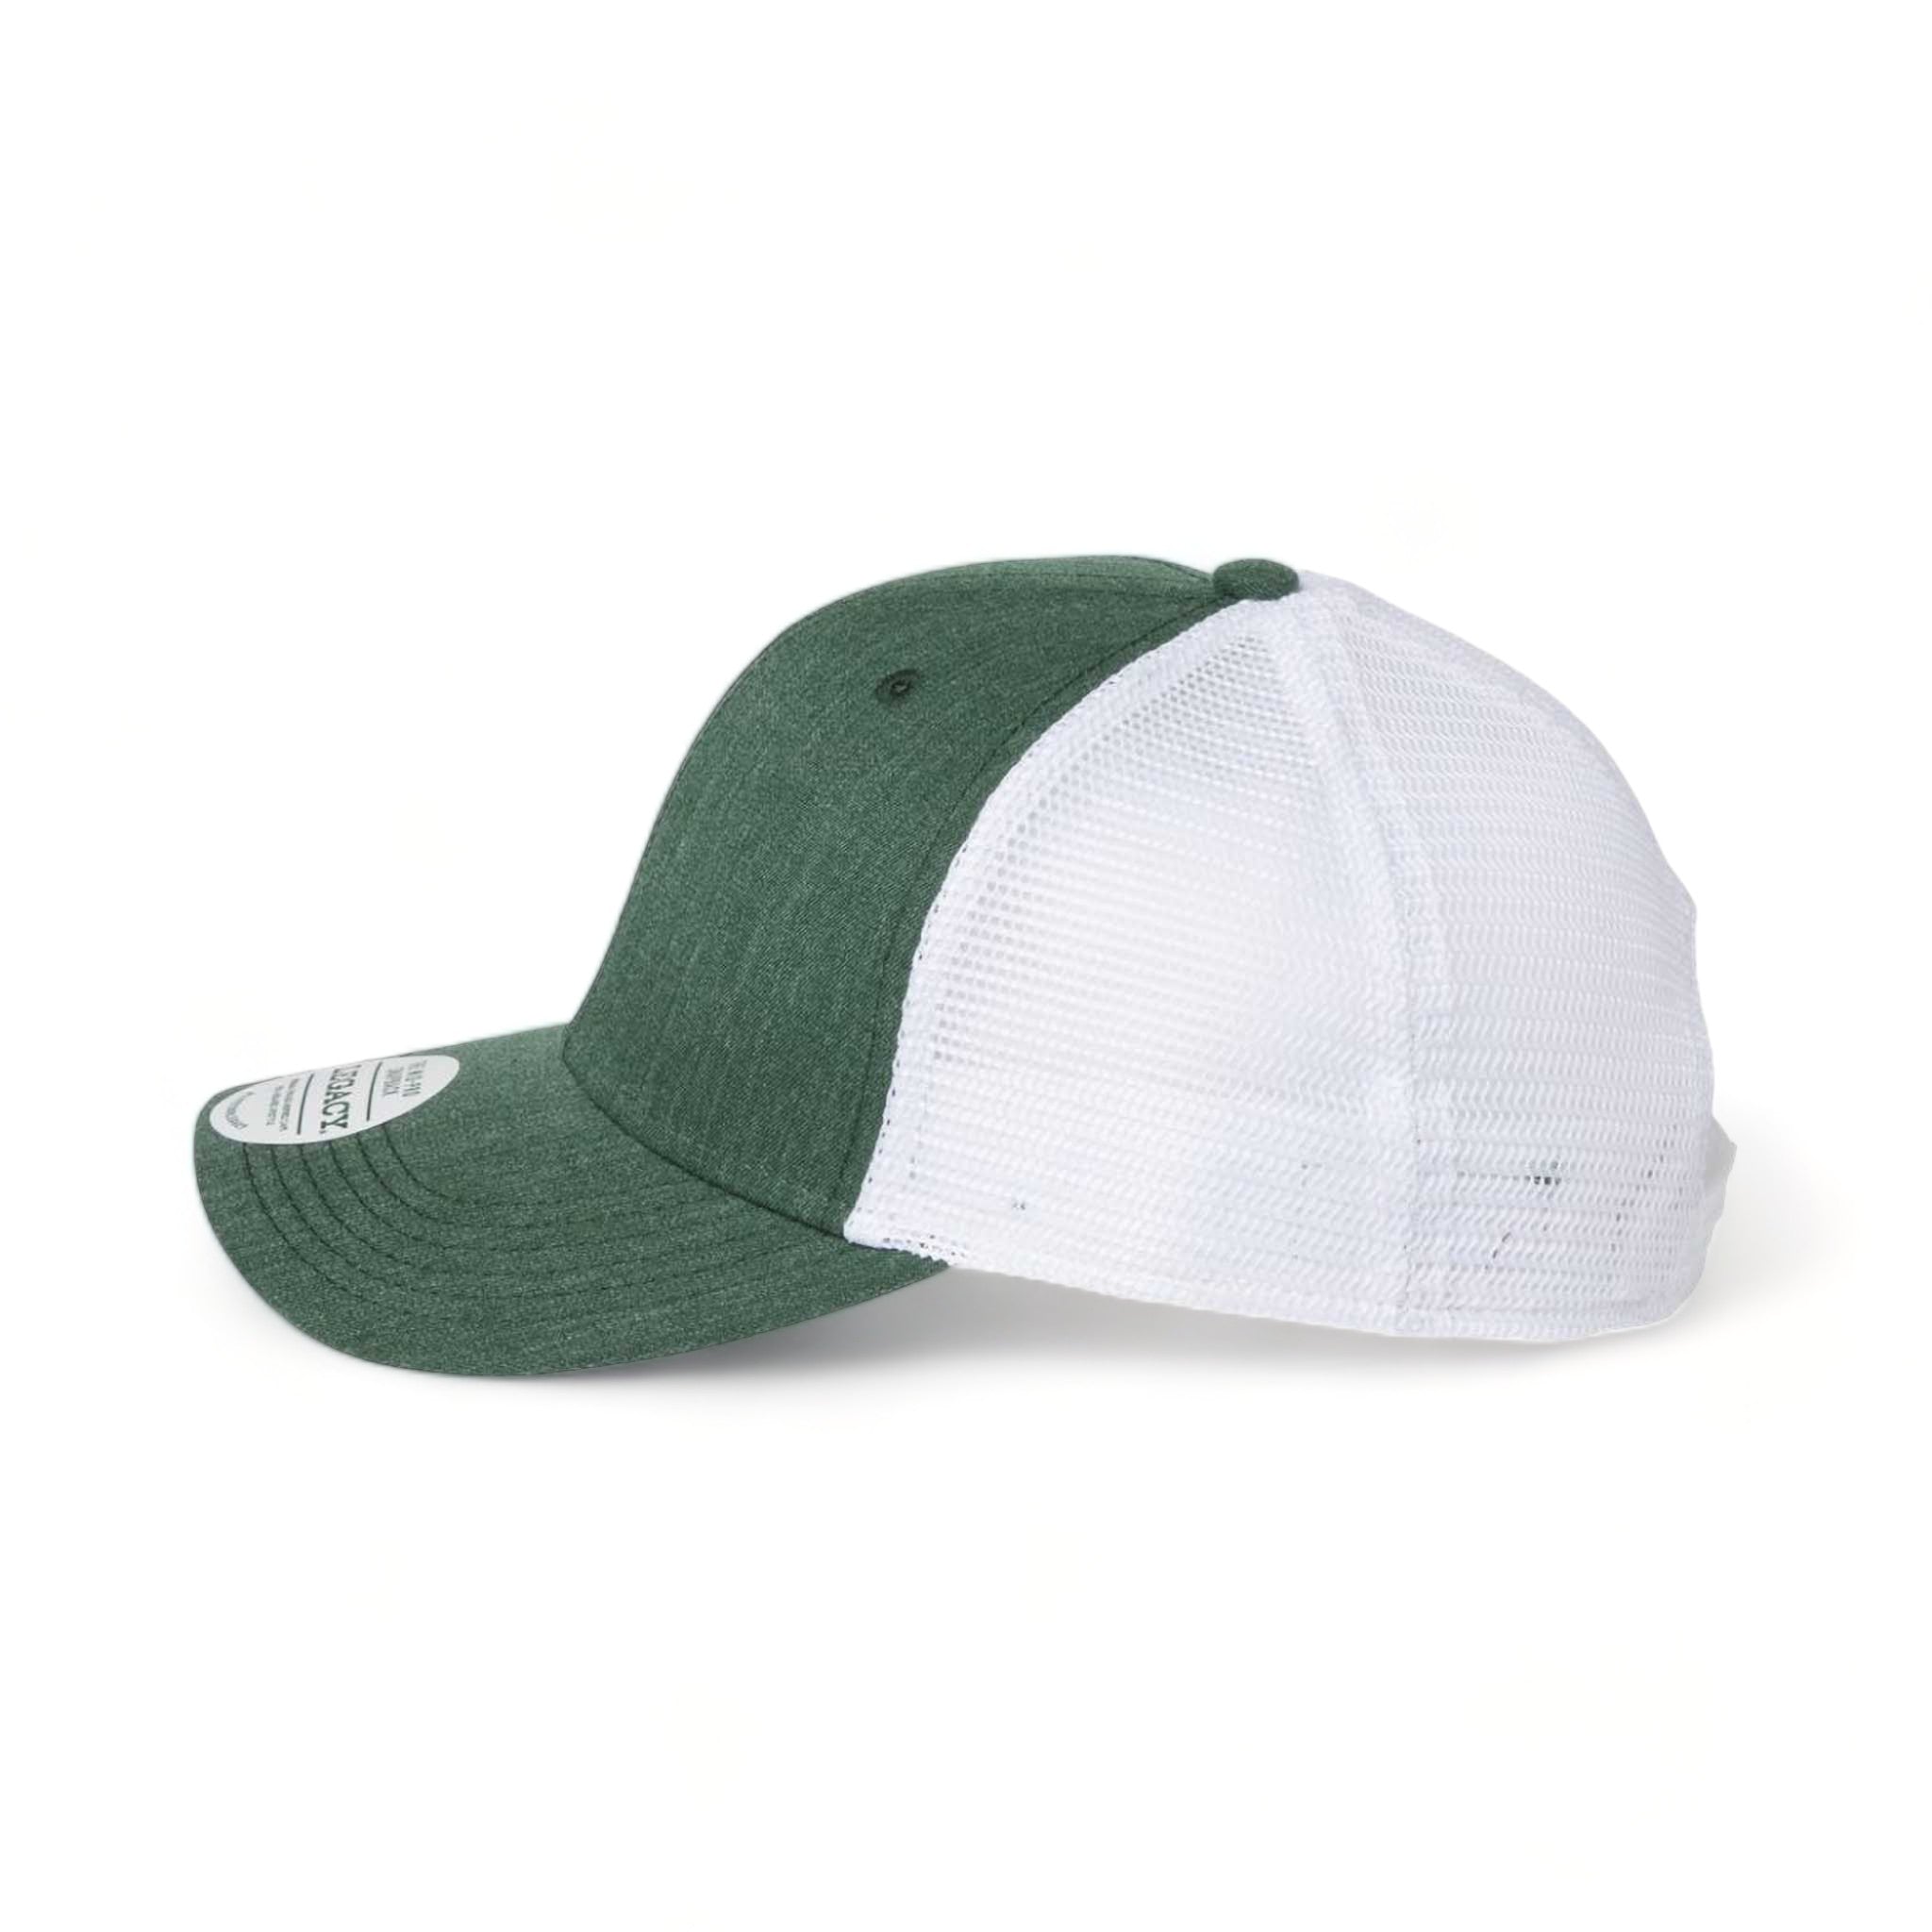 Side view of LEGACY MPS custom hat in mélange dark green and white